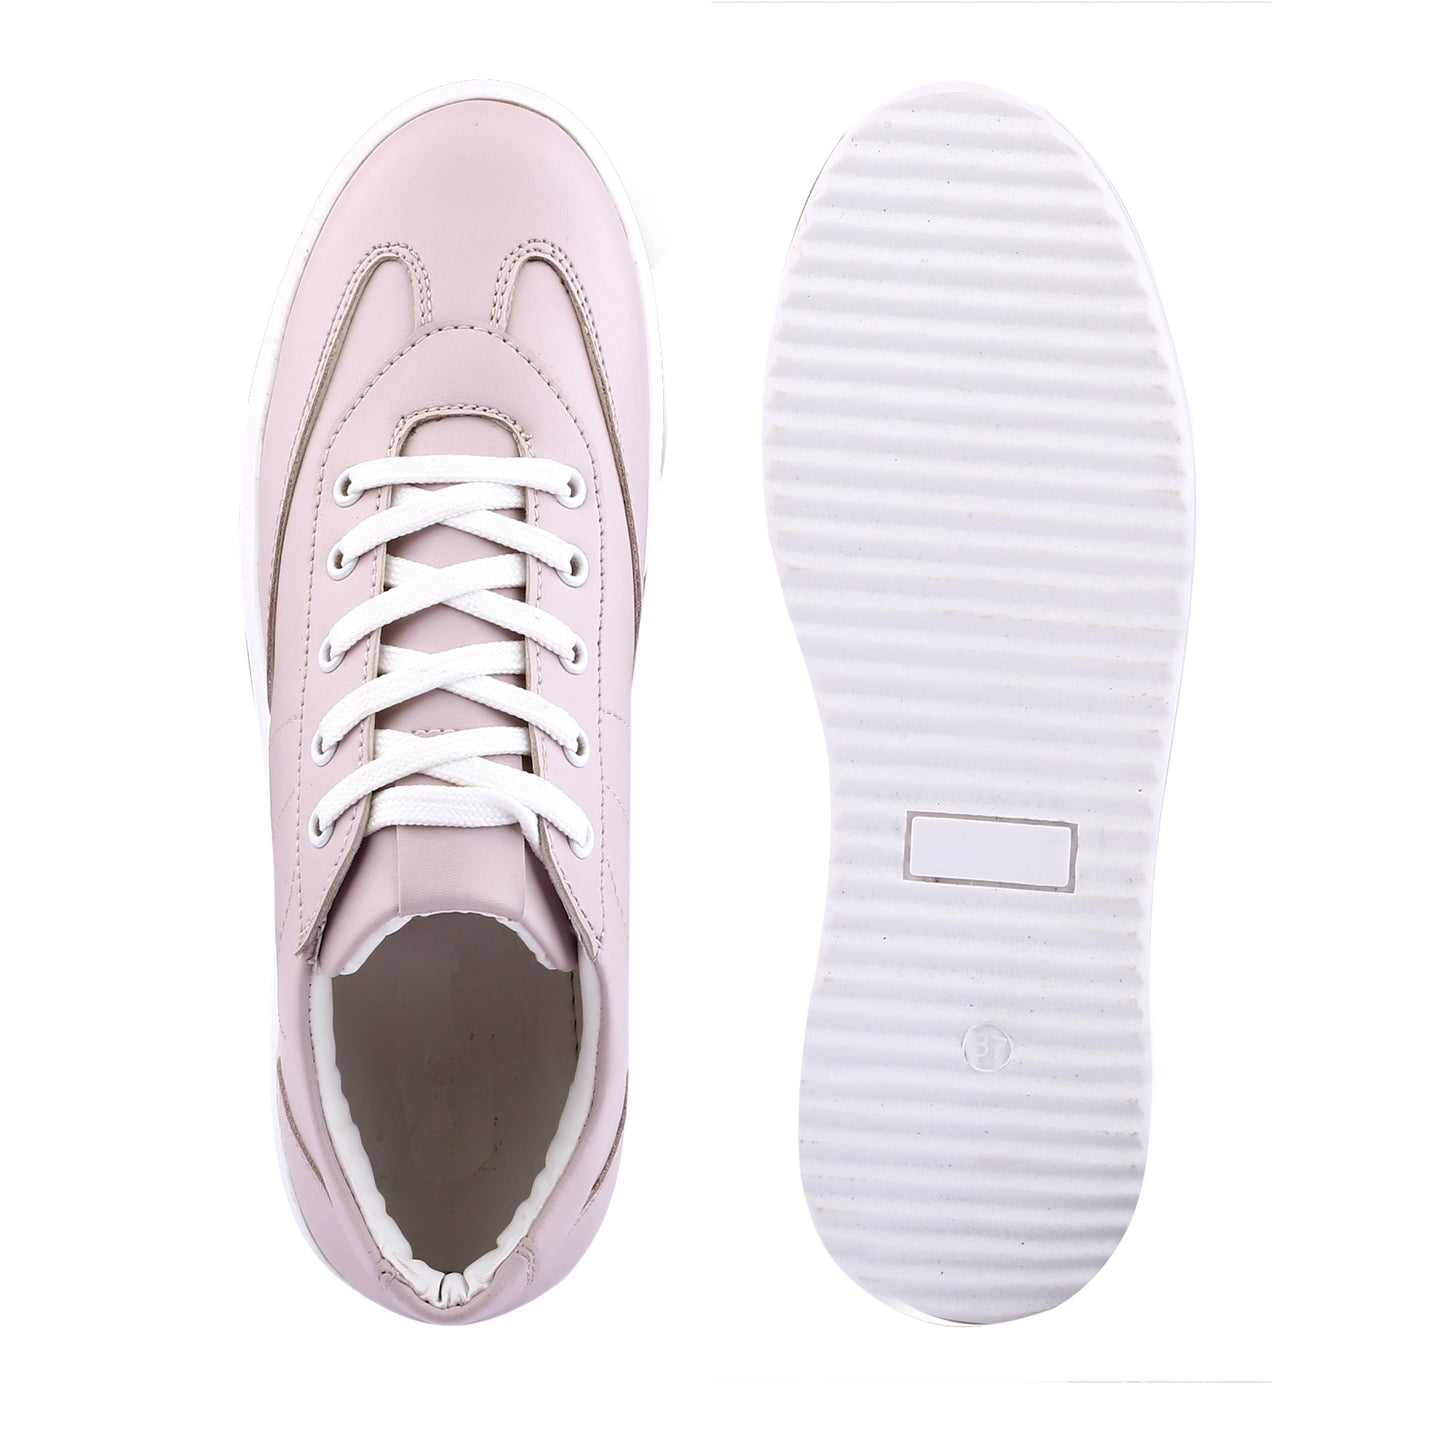 Women's Pu Synthetic Leather Material New Stylish Grey Casual Sneaker Lace up, Shoes